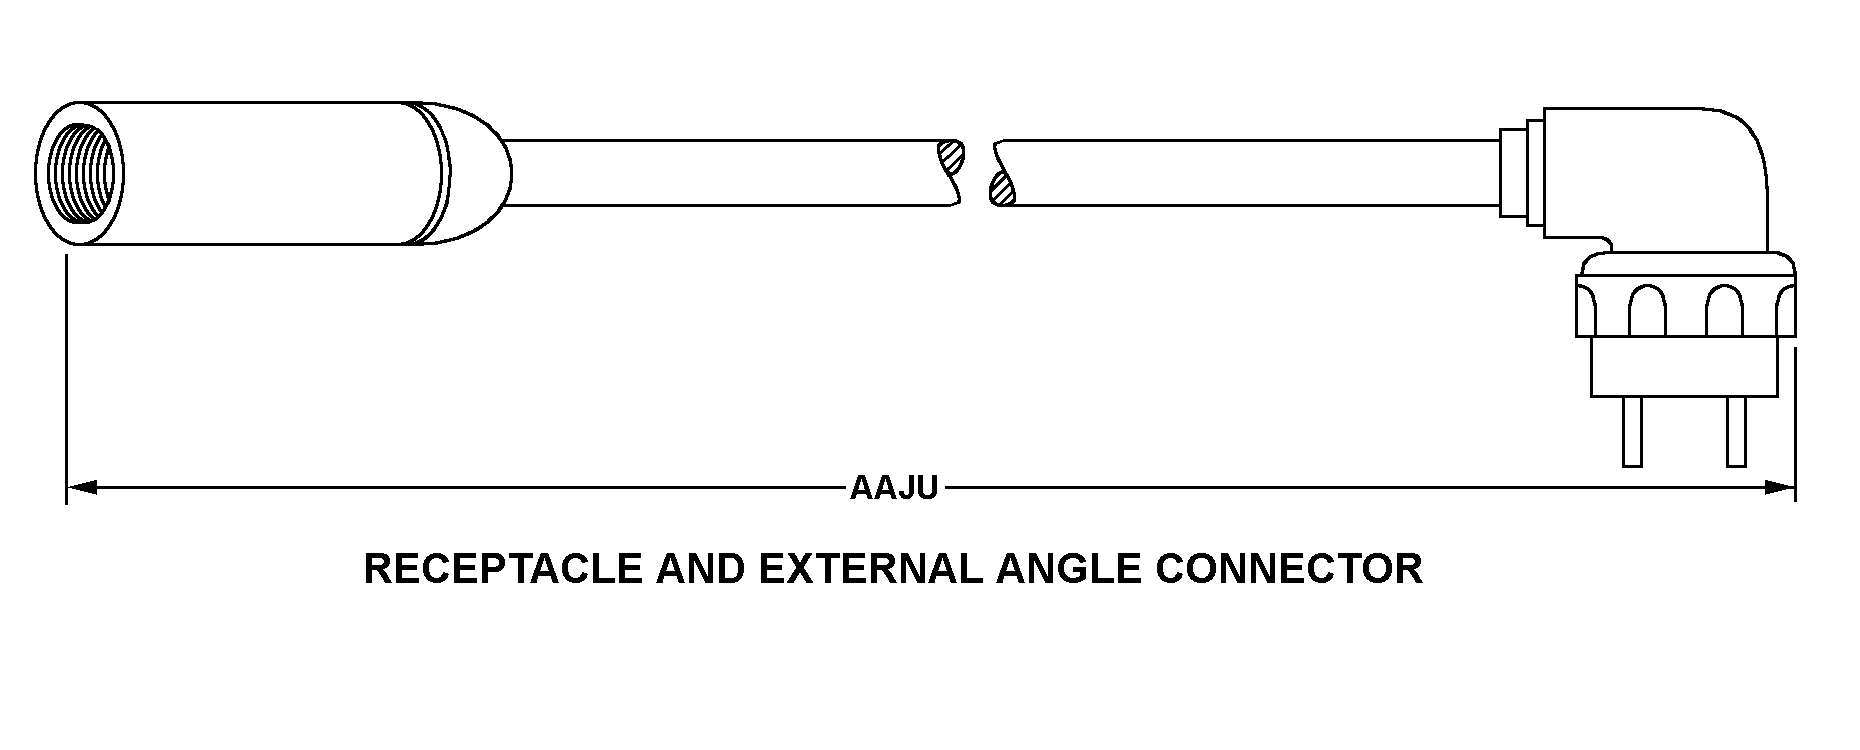 RECEPTACLE AND EXTERNAL ANGLE CONNECTOR style nsn 5995-01-041-9227